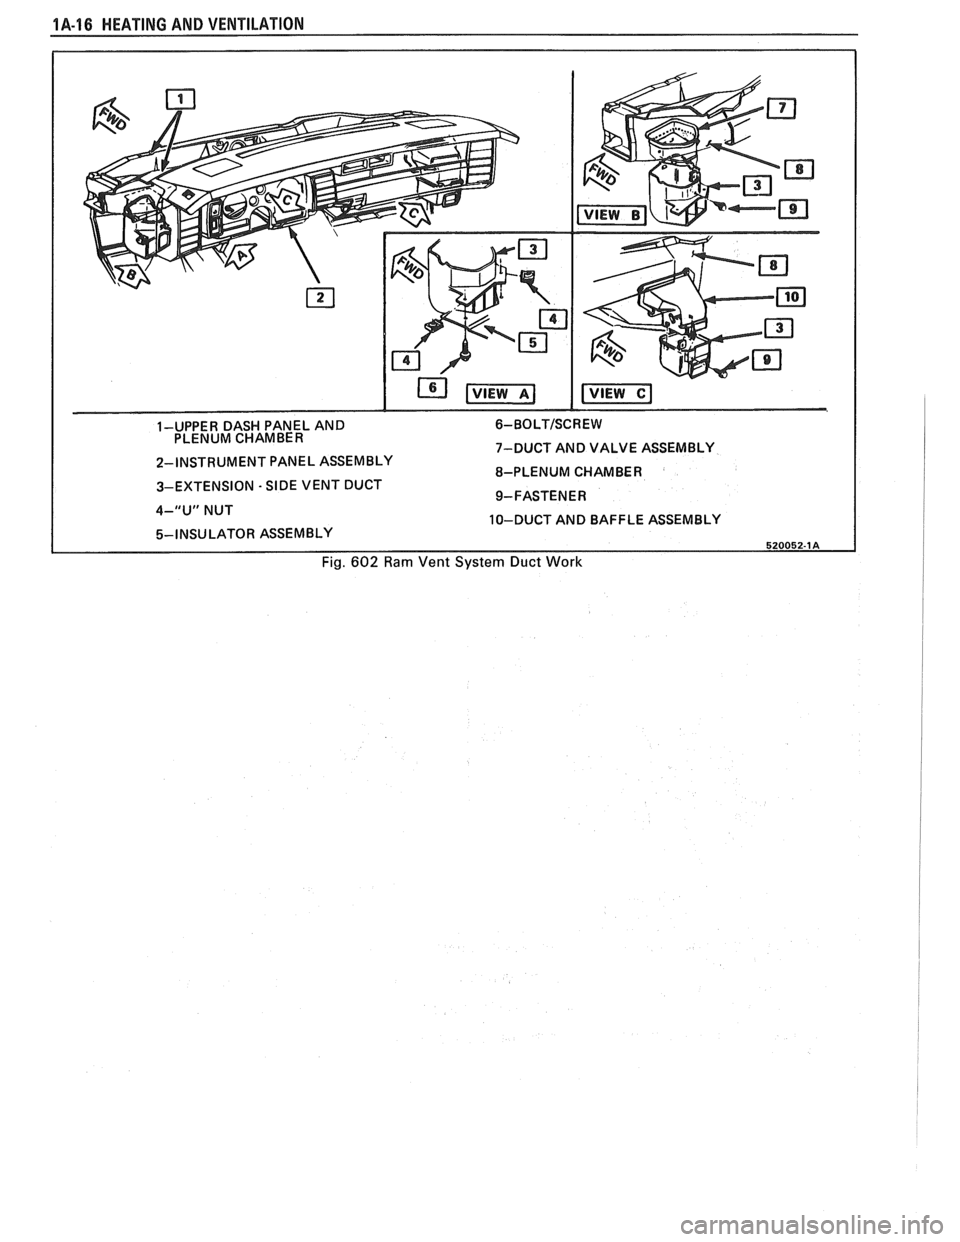 PONTIAC FIERO 1988  Service Owners Guide 
1A-16 HEATING AND VENTILATION 
1-UPPER  DASH PANEL AND 6- BO LT/SC R E W PLENUM  CHAMBER 
7-DUCT  AND VALVE ASSEMBLY 
2-INSTRUMENT  PANEL ASSEMBLY 
8-PLENUM CHAMBER 
3-EXTENSION 
- SIDE VENT  DUCT 
9